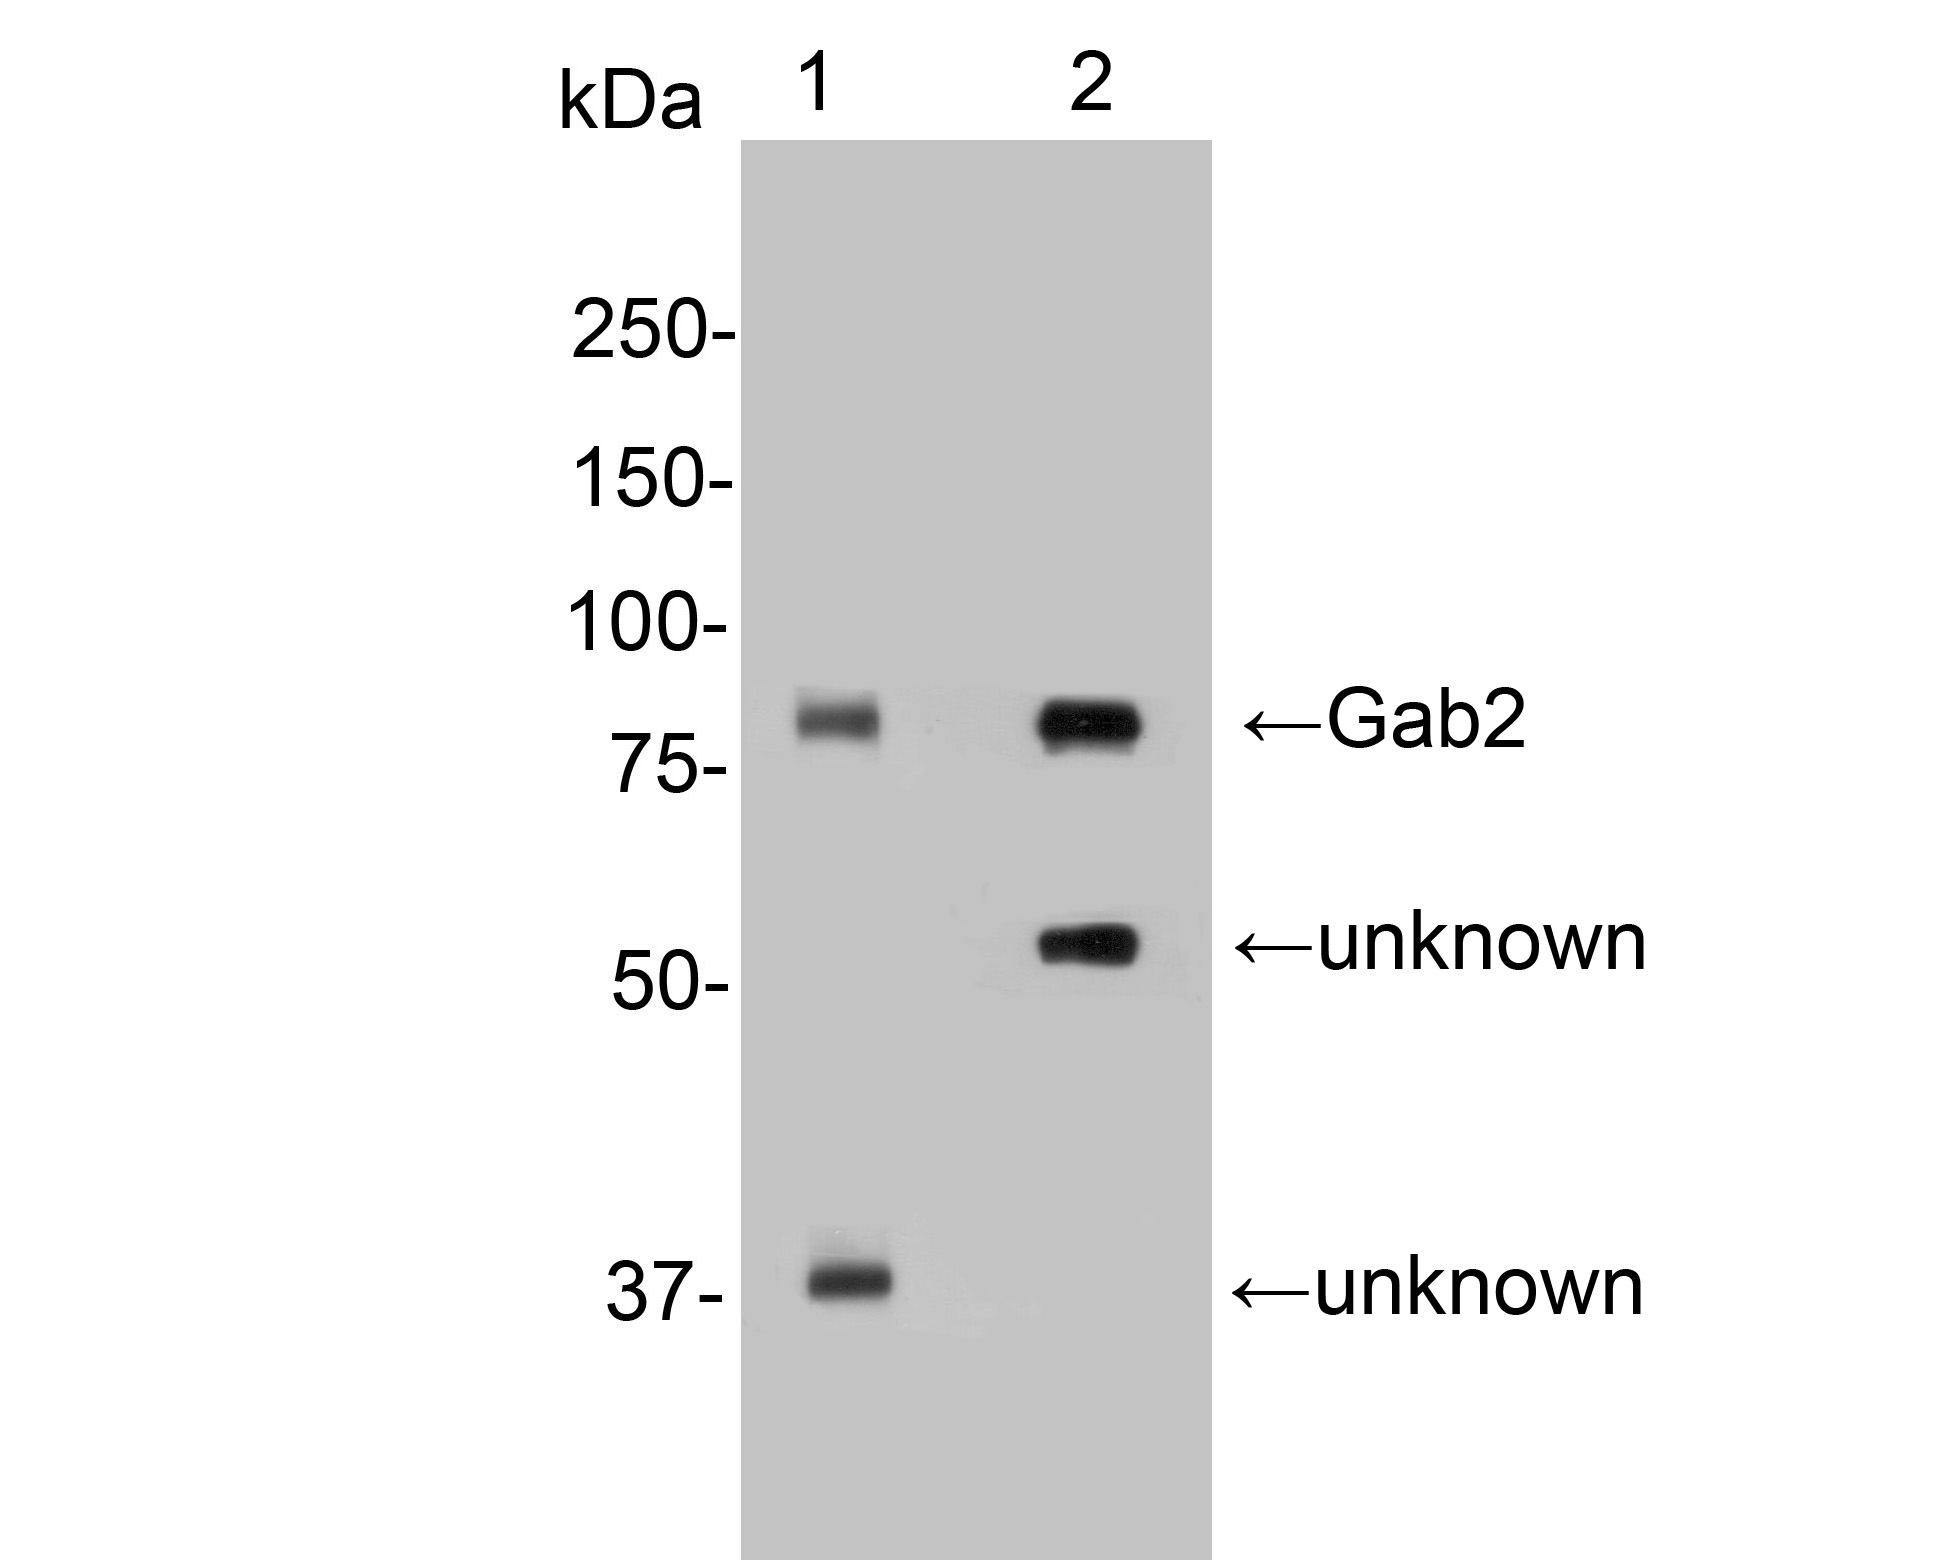 Western blot analysis of Gab2 on different lysates. Proteins were transferred to a PVDF membrane and blocked with 5% NFDM/TBST for 1 hour at room temperature. The primary antibody (HA500292, 1/1,000) was used in 5% NFDM/TBST at room temperature for 2 hours. Goat Anti-Rabbit IgG - HRP Secondary Antibody (HA1001) at 1:200,000 dilution was used for 1 hour at room temperature.<br />
Positive control: <br />
Lane 1: Hela cell lysate<br />
Lane 2: mouse brain tissue lysate